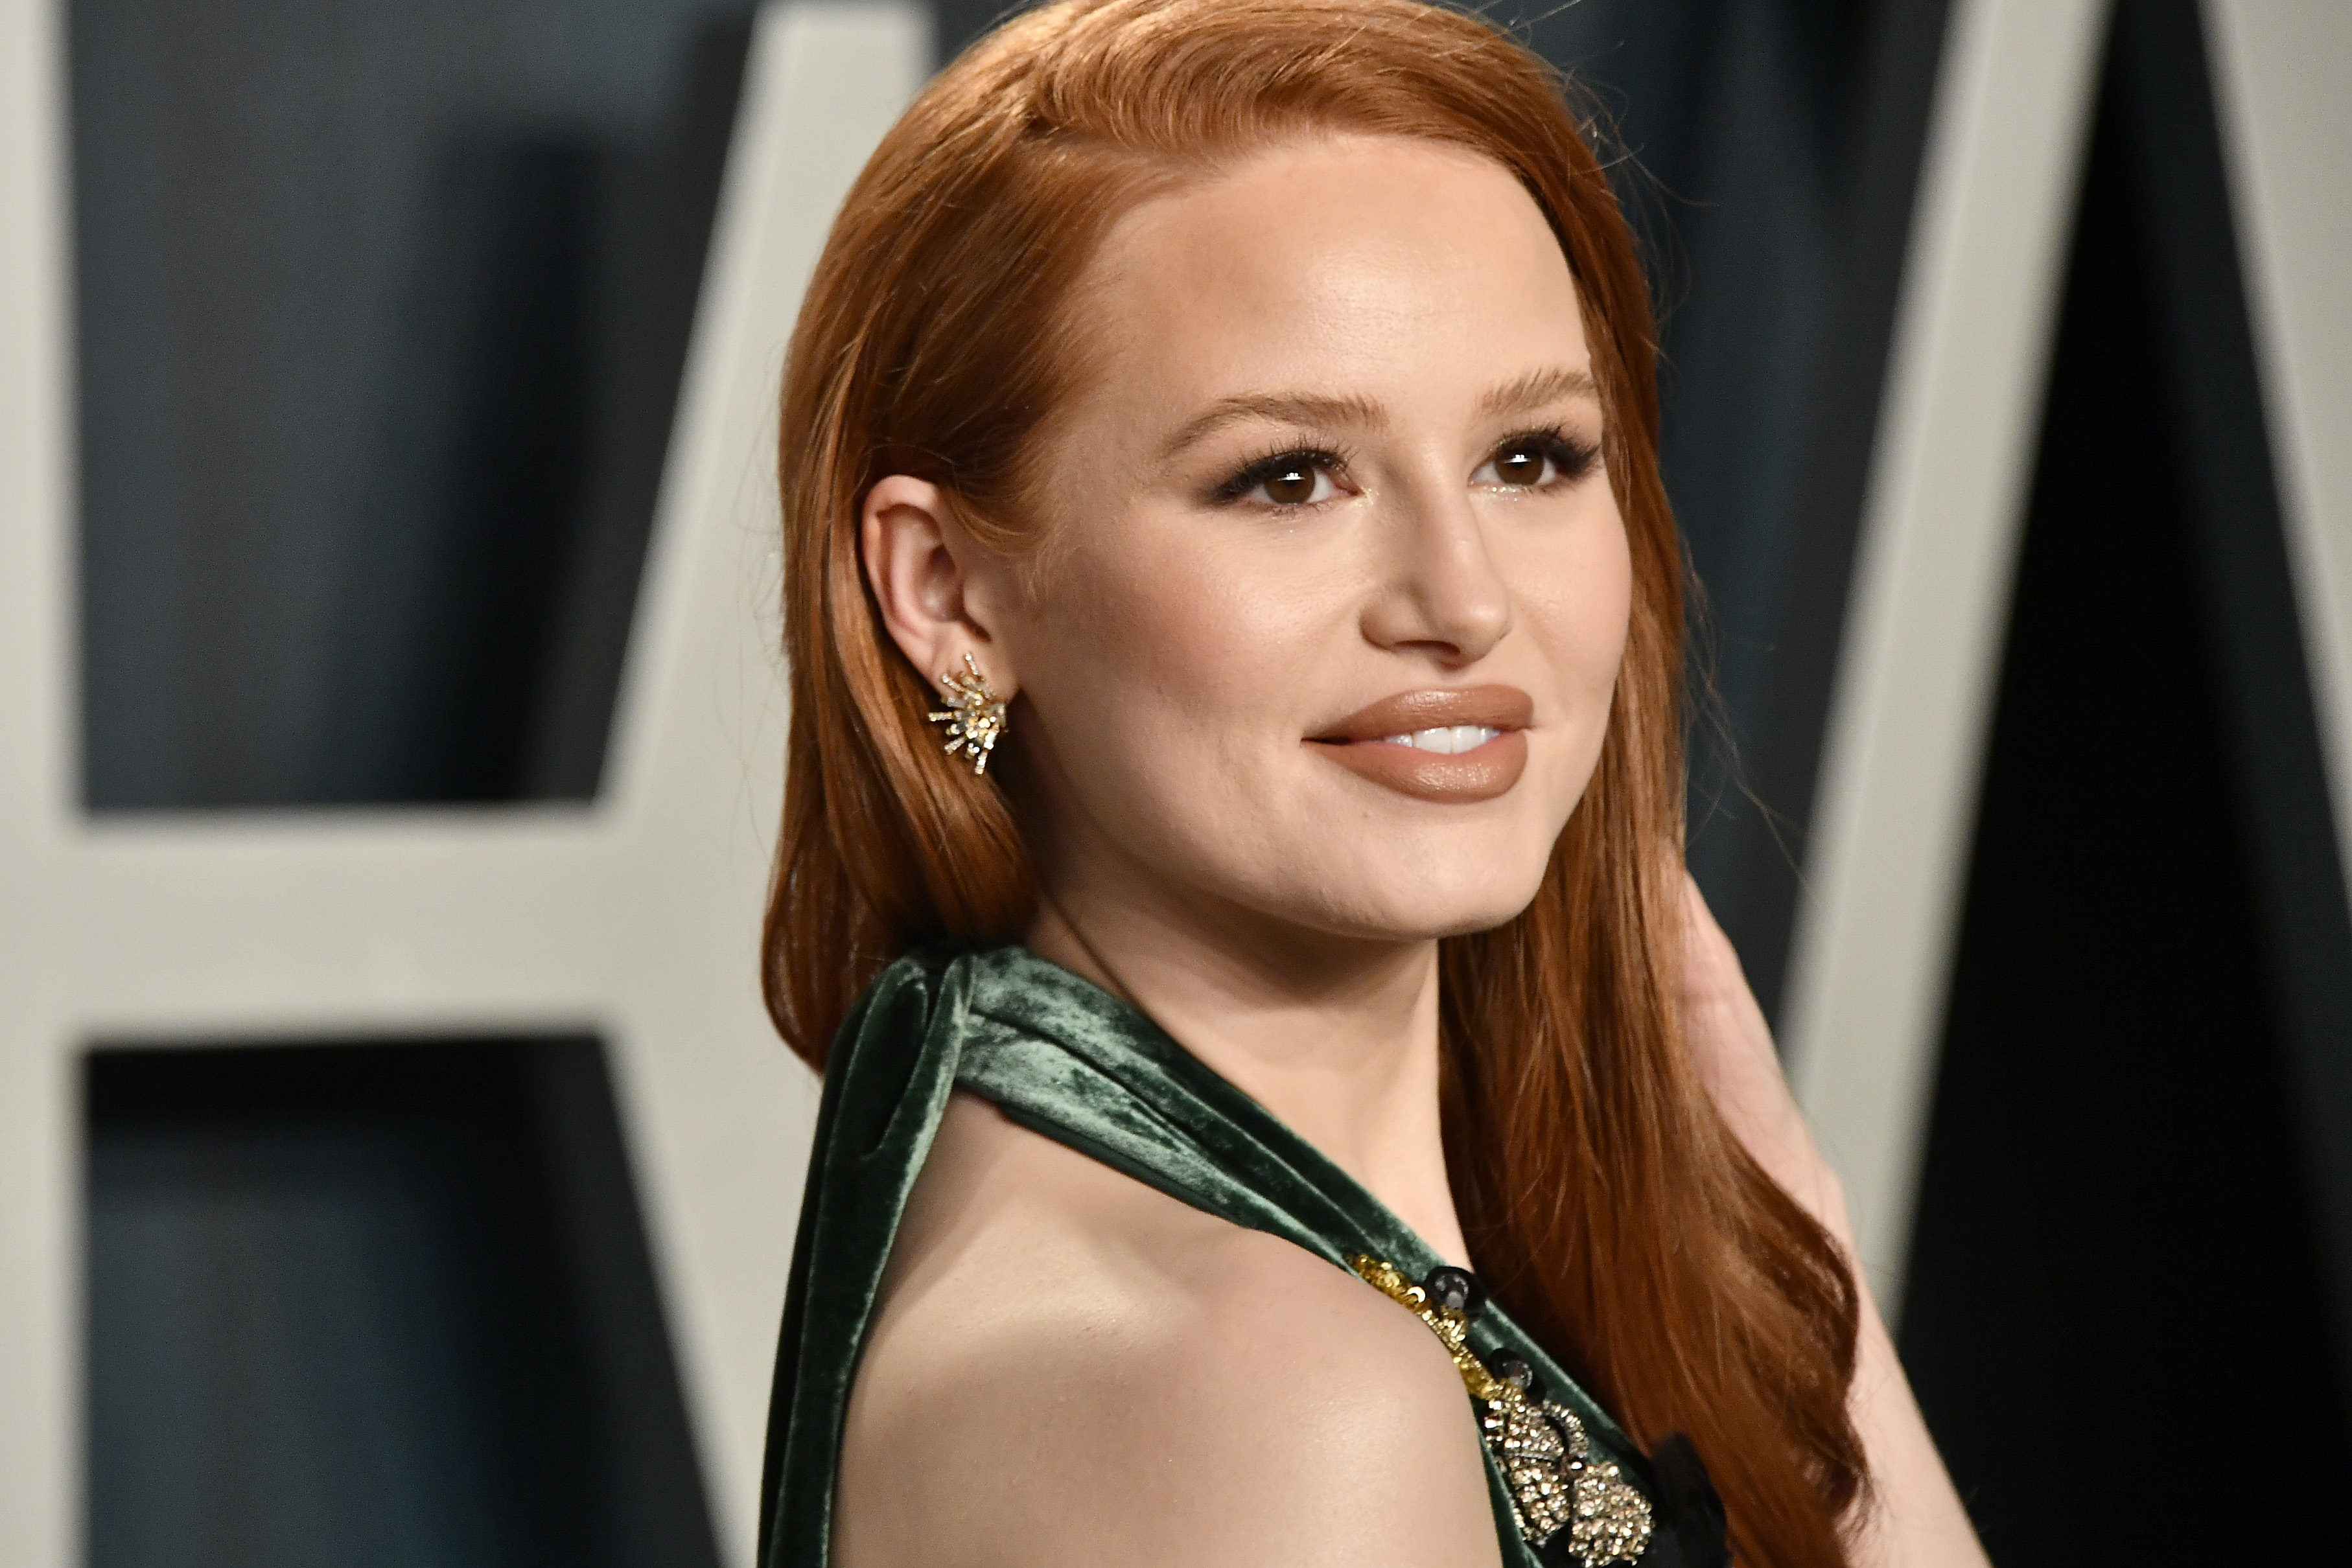 Madelaine Petsch at the Vanity Fair Oscar Party at Wallis Annenberg Center for the Performing Arts in Beverly Hills, California, on February 09, 2020. | Source: Getty Images